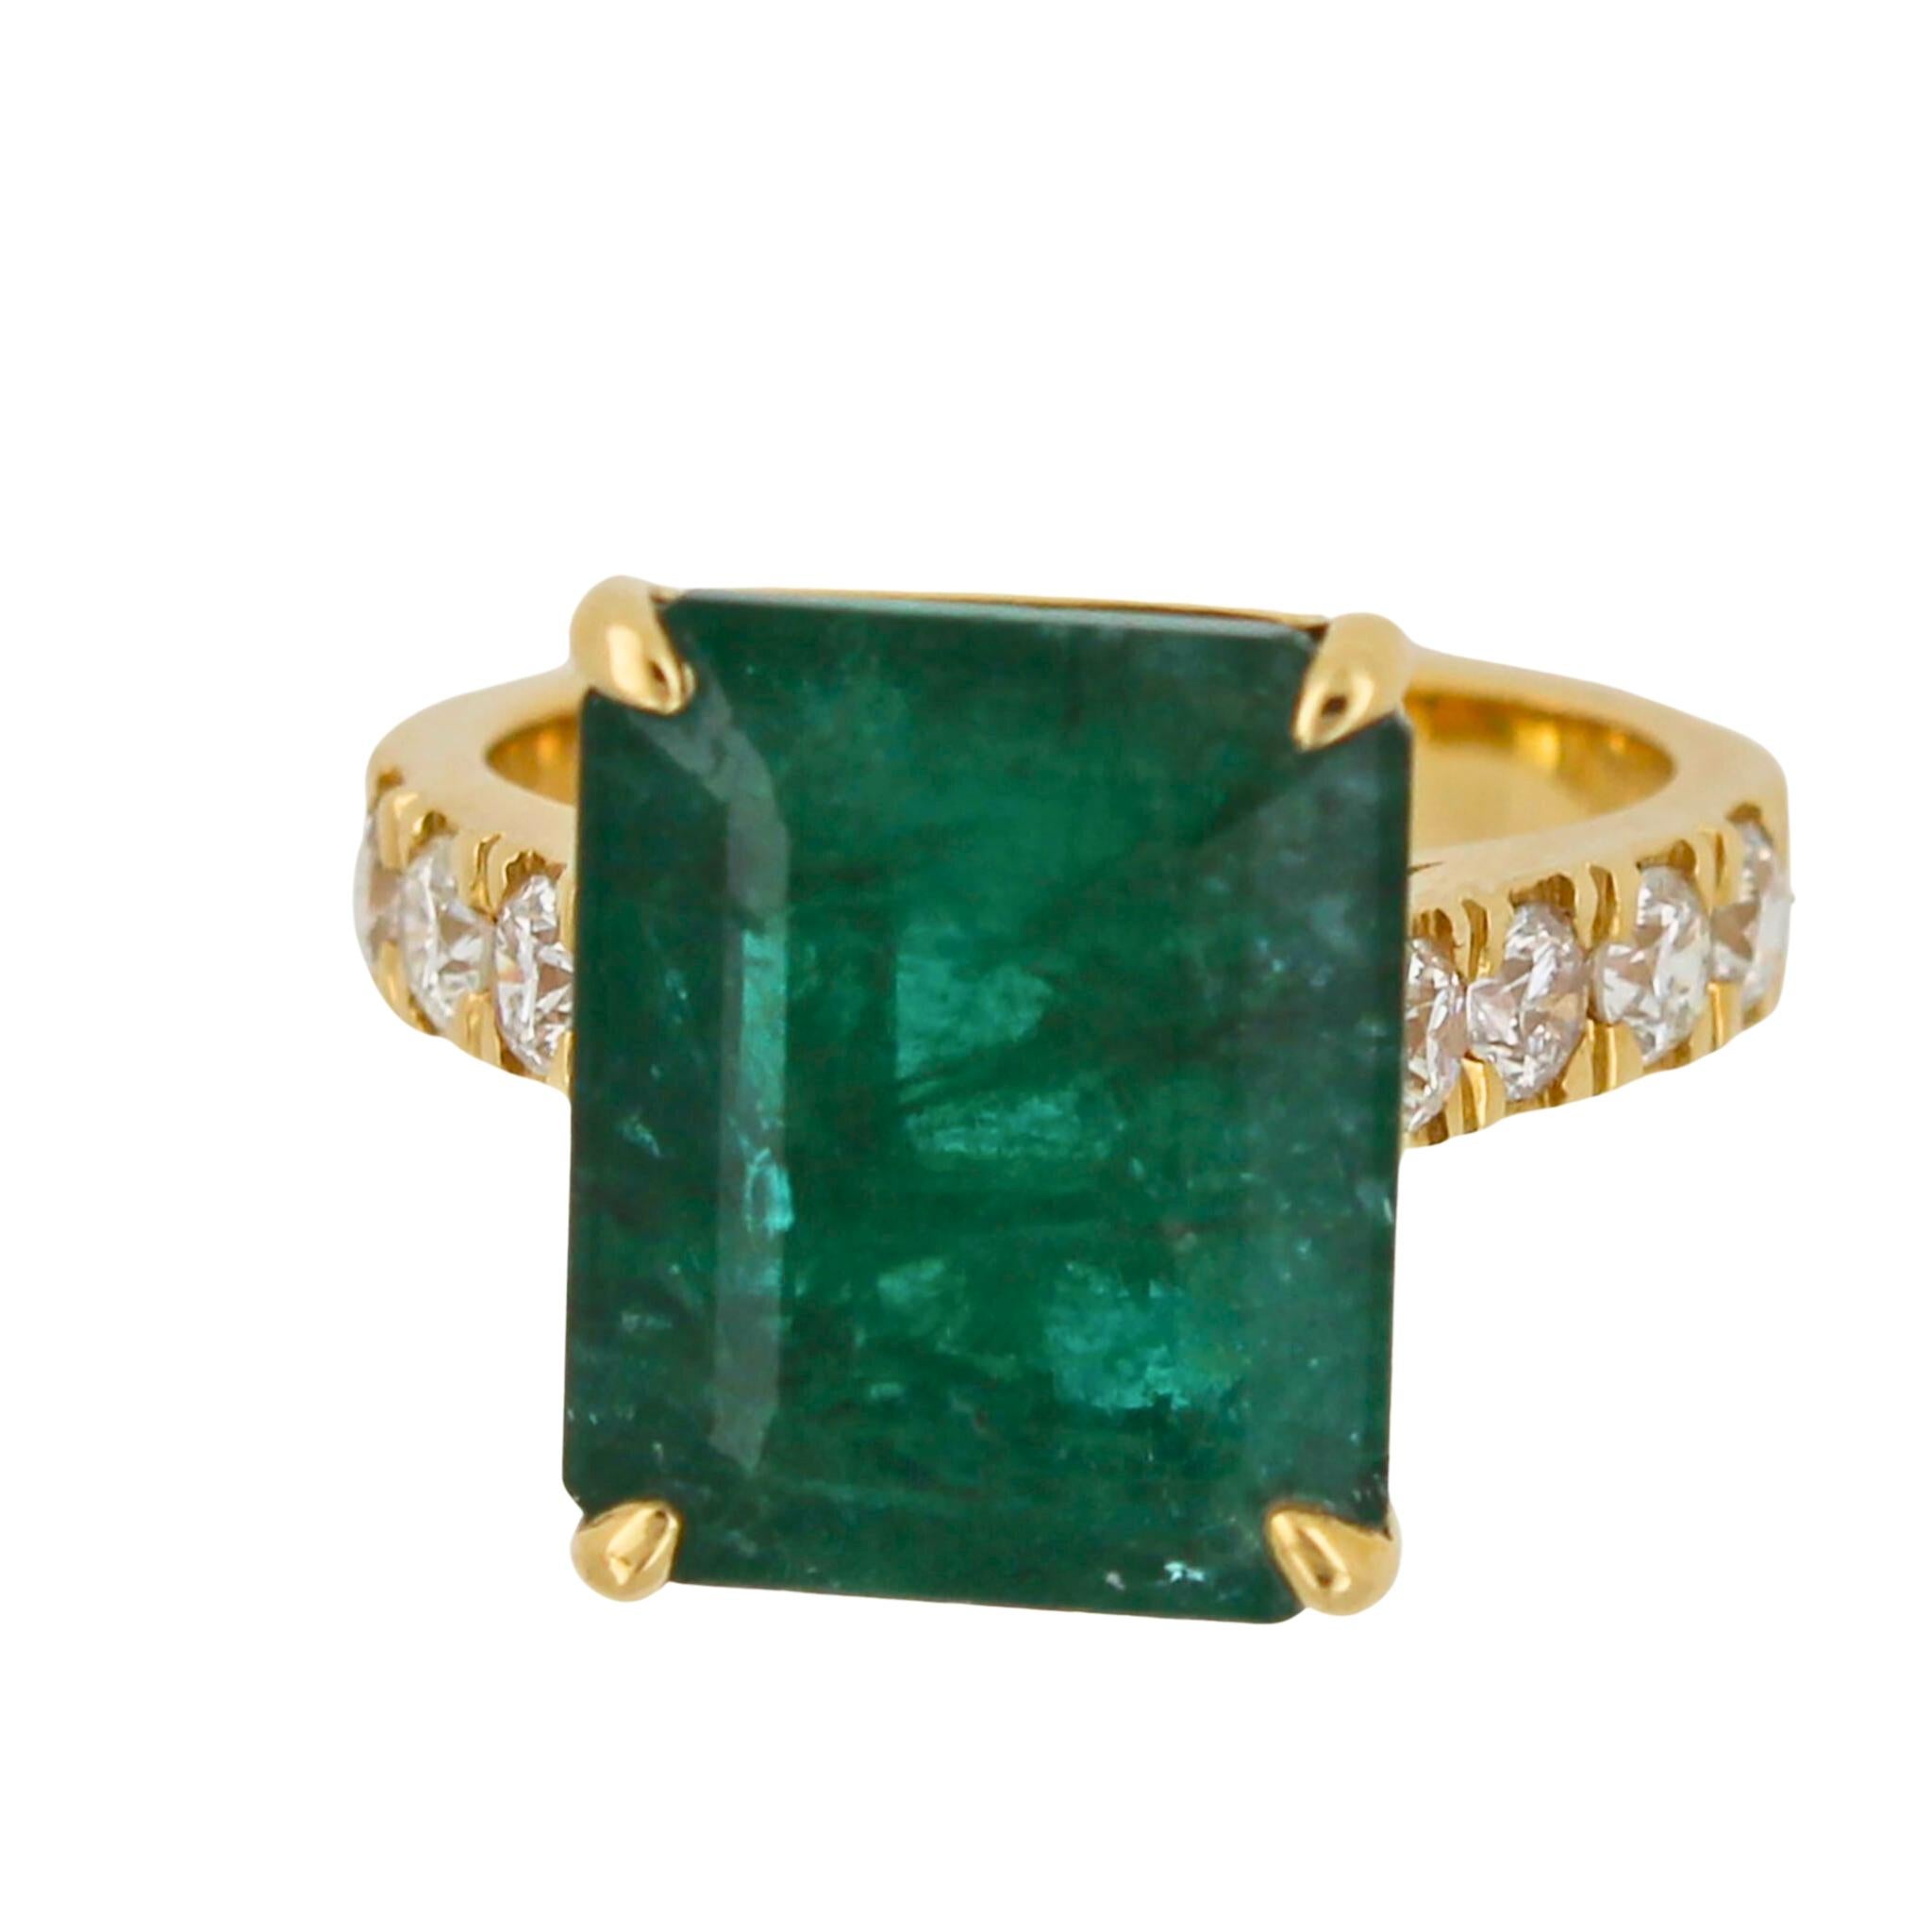 18 Karat Yellow Gold
Genuine Emerald & Natural Diamonds
Emerald is a fancy, deep forest green color - very beautiful!
10.15 CT Emerald Gemstone
0.80 CTW Diamonds
Current Regular Size 7 – Resizable upon request
Designed & Handmade in Washington, D.C.